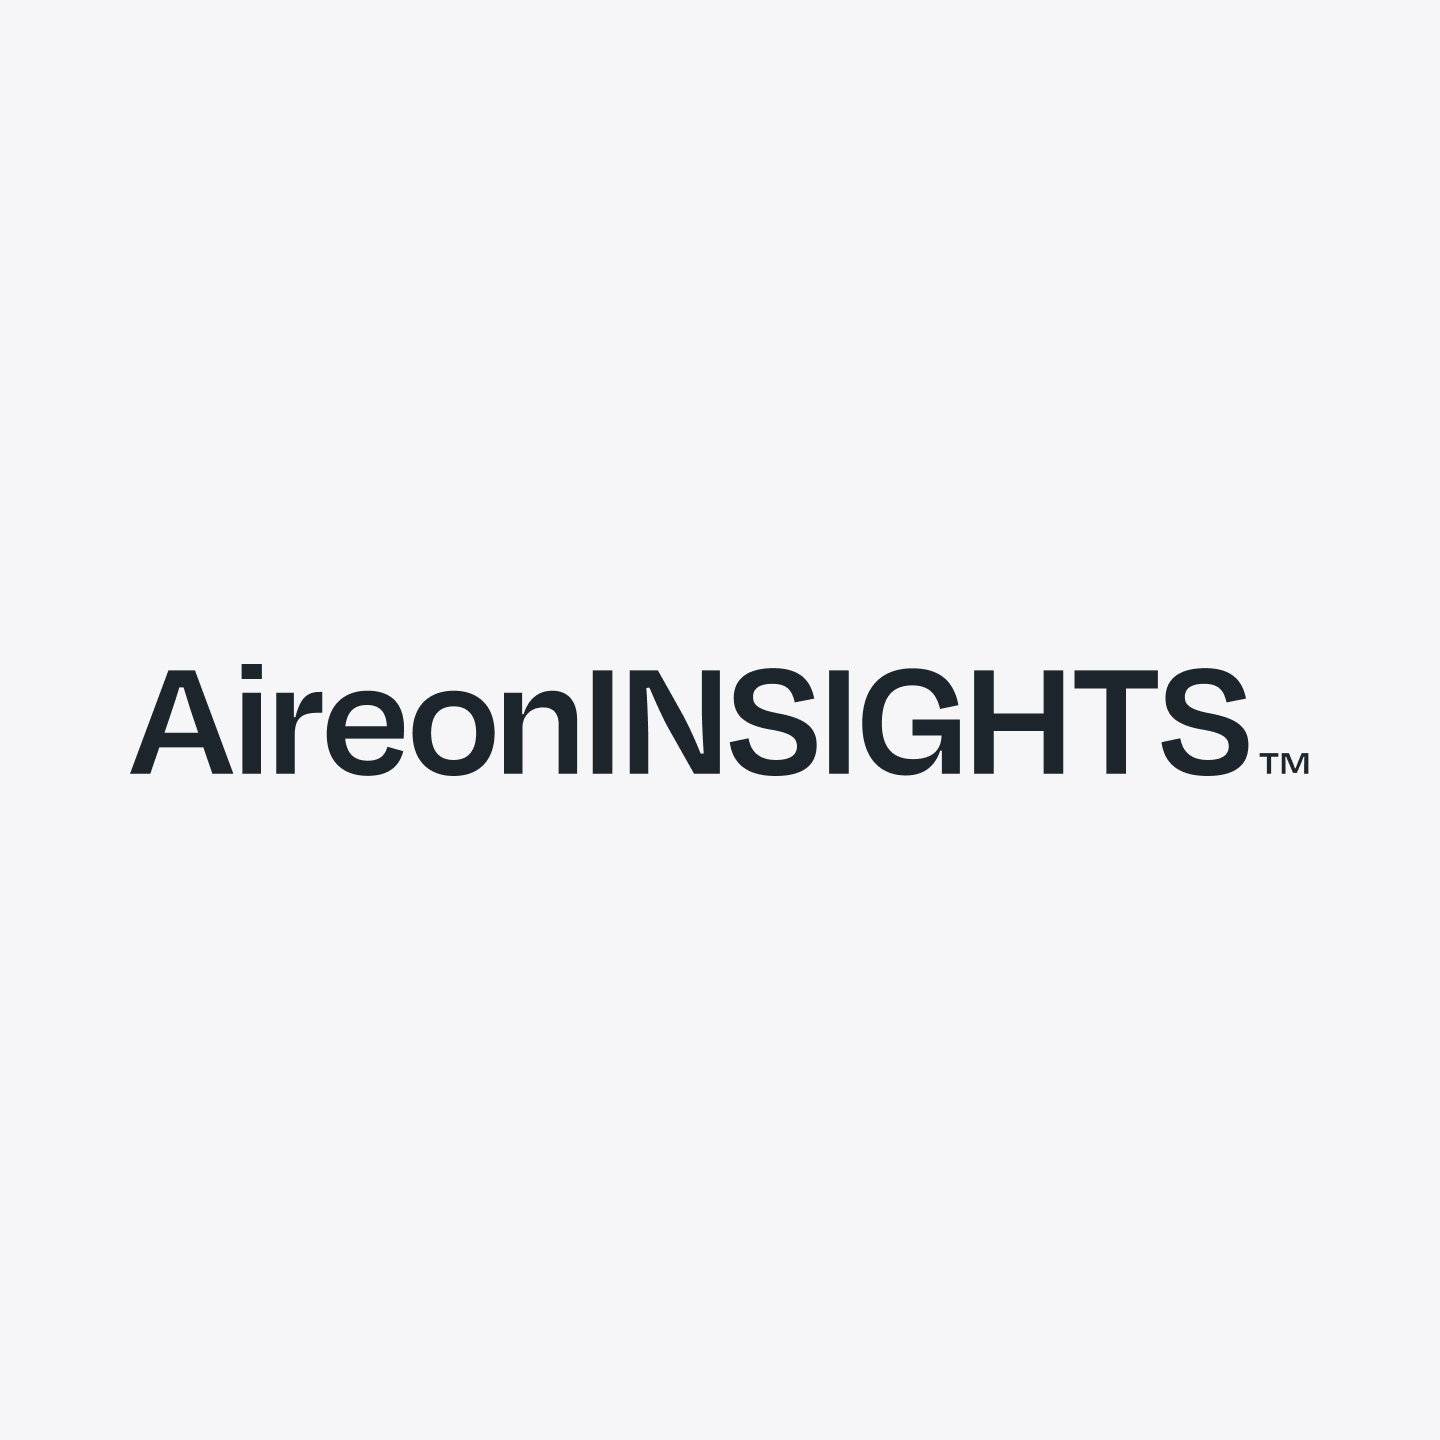 aireon insights logo